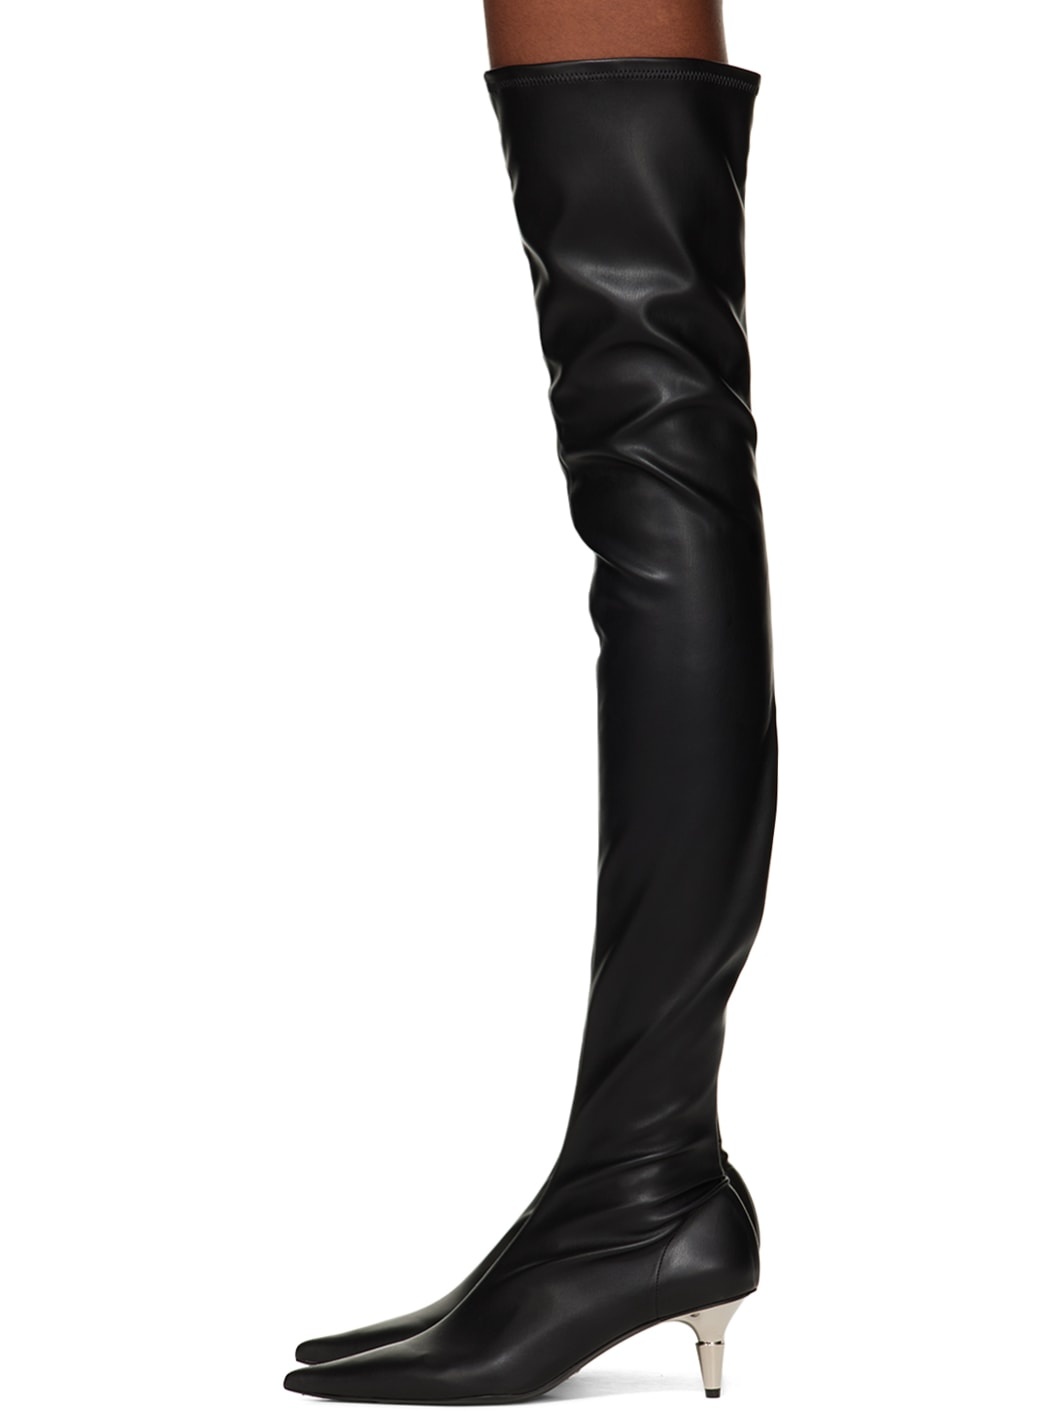 Black Spike Over-The-Knee Boots - 3